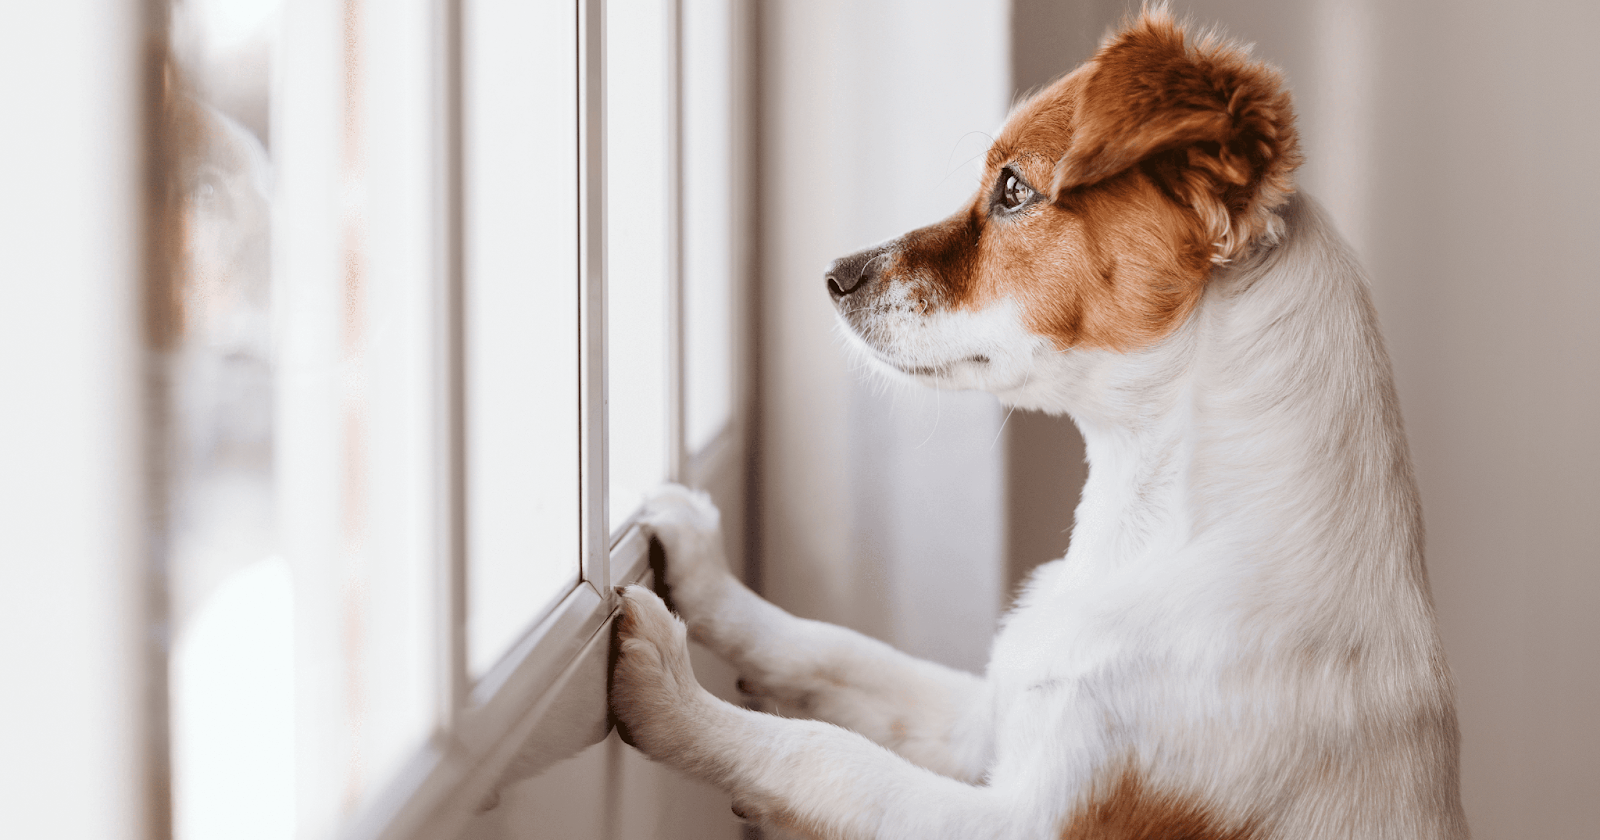 Small dog standing up to look out of a window